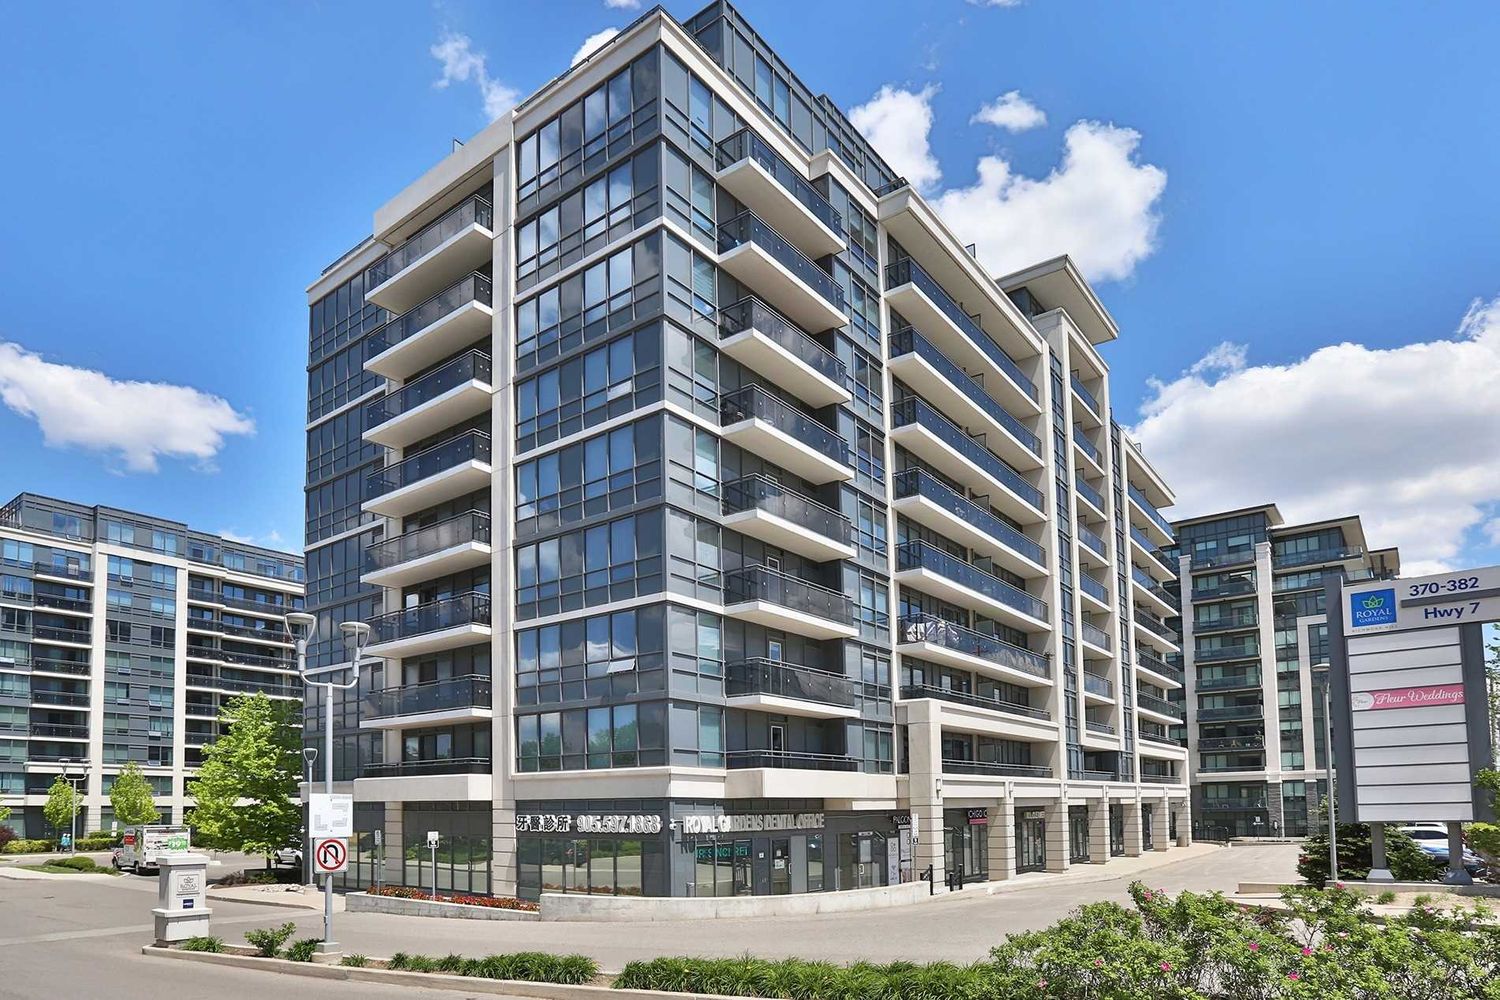 372 Highway 7. Royal Gardens II Condos is located in  Richmond Hill, Toronto - image #2 of 3